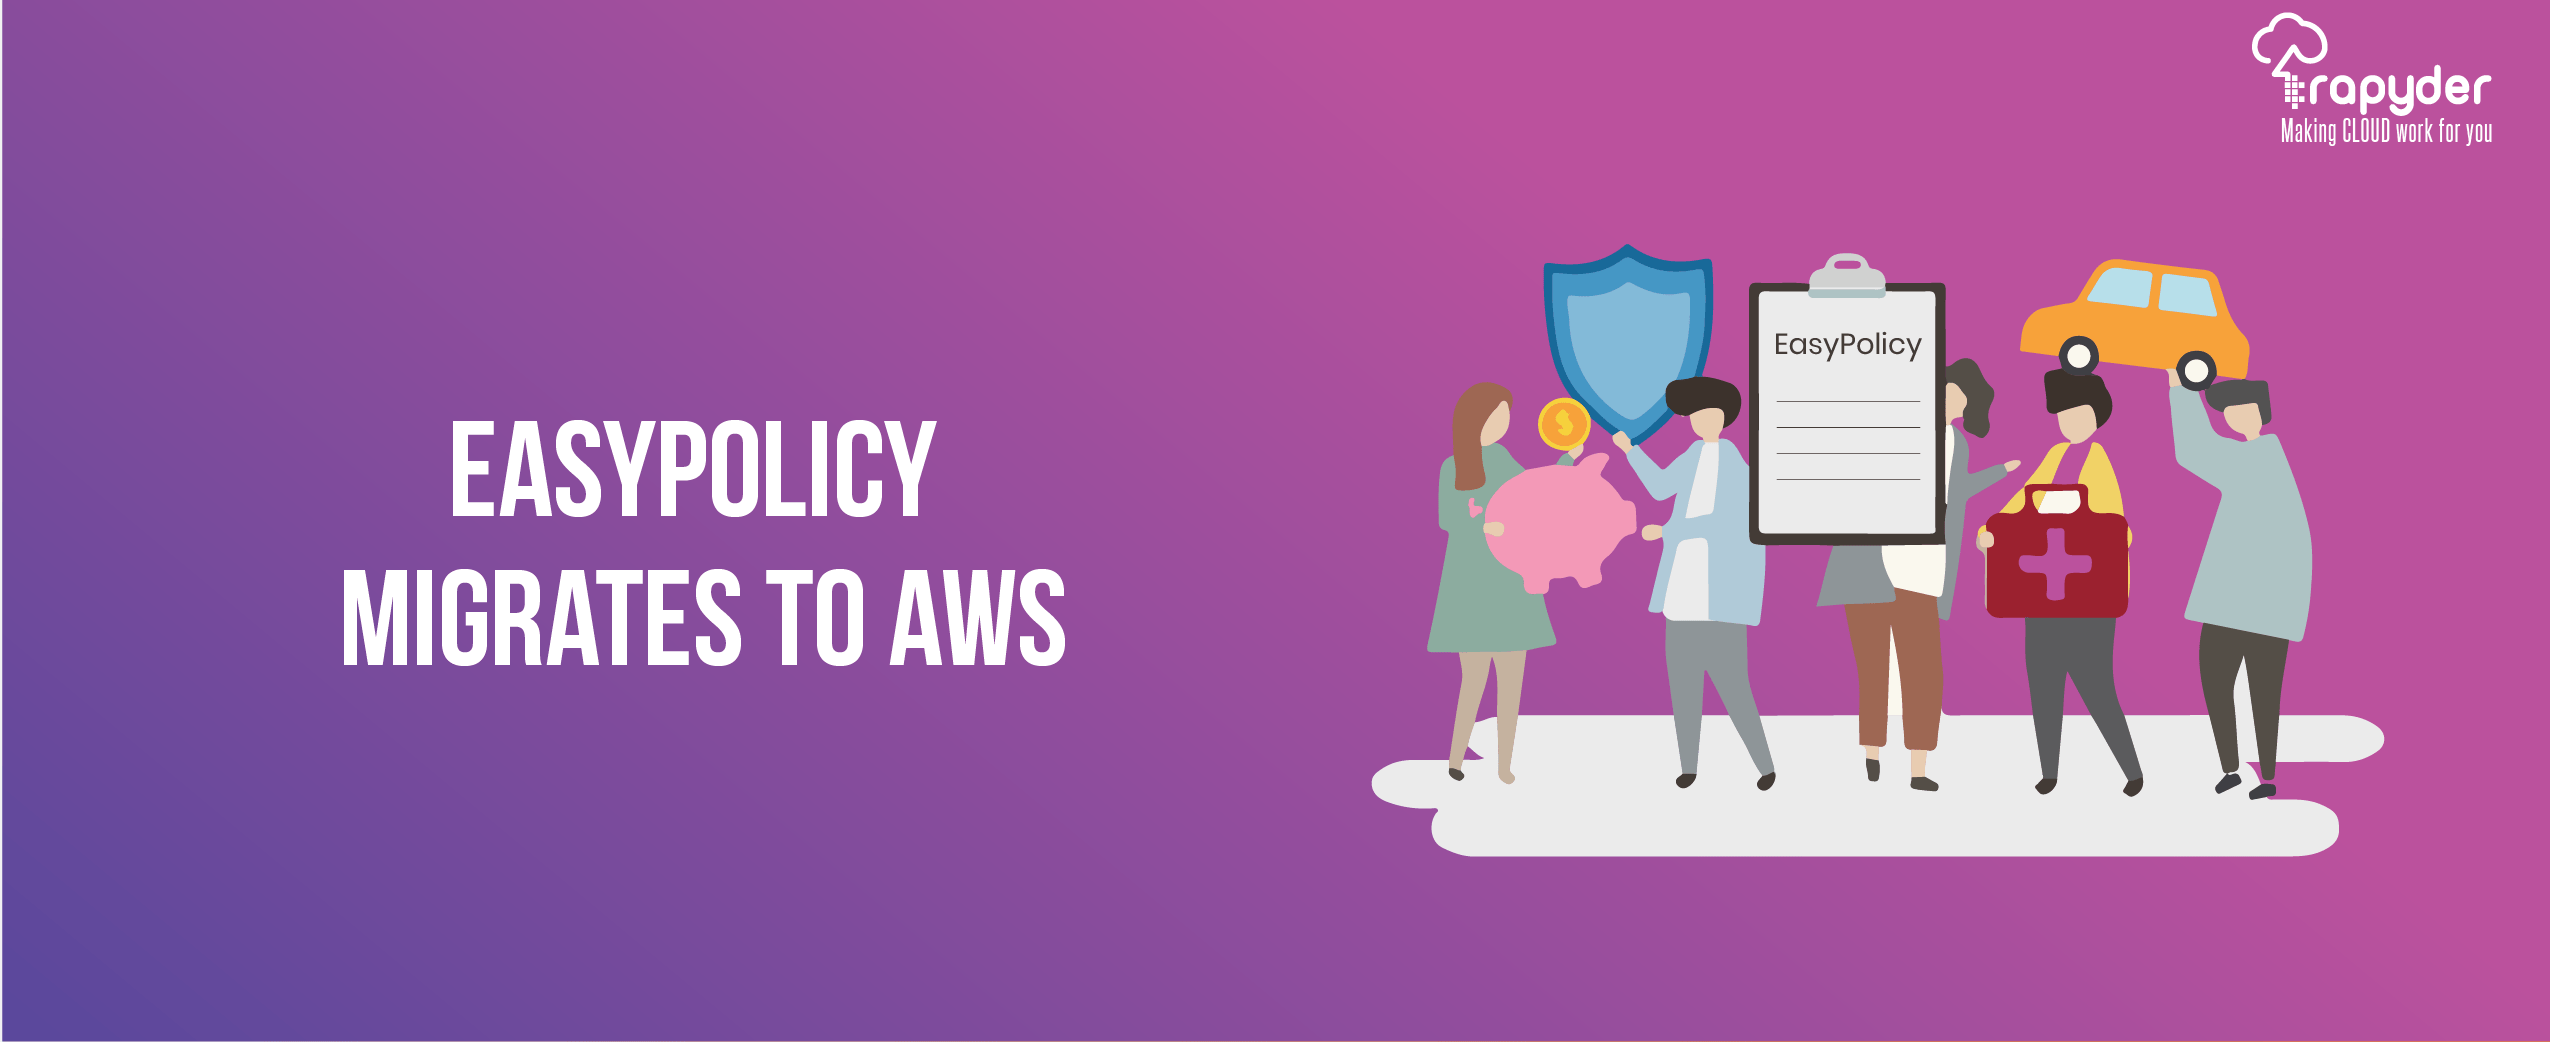 AWS IndurTech Cloud Services Case Study of Easypolicy.com banner image